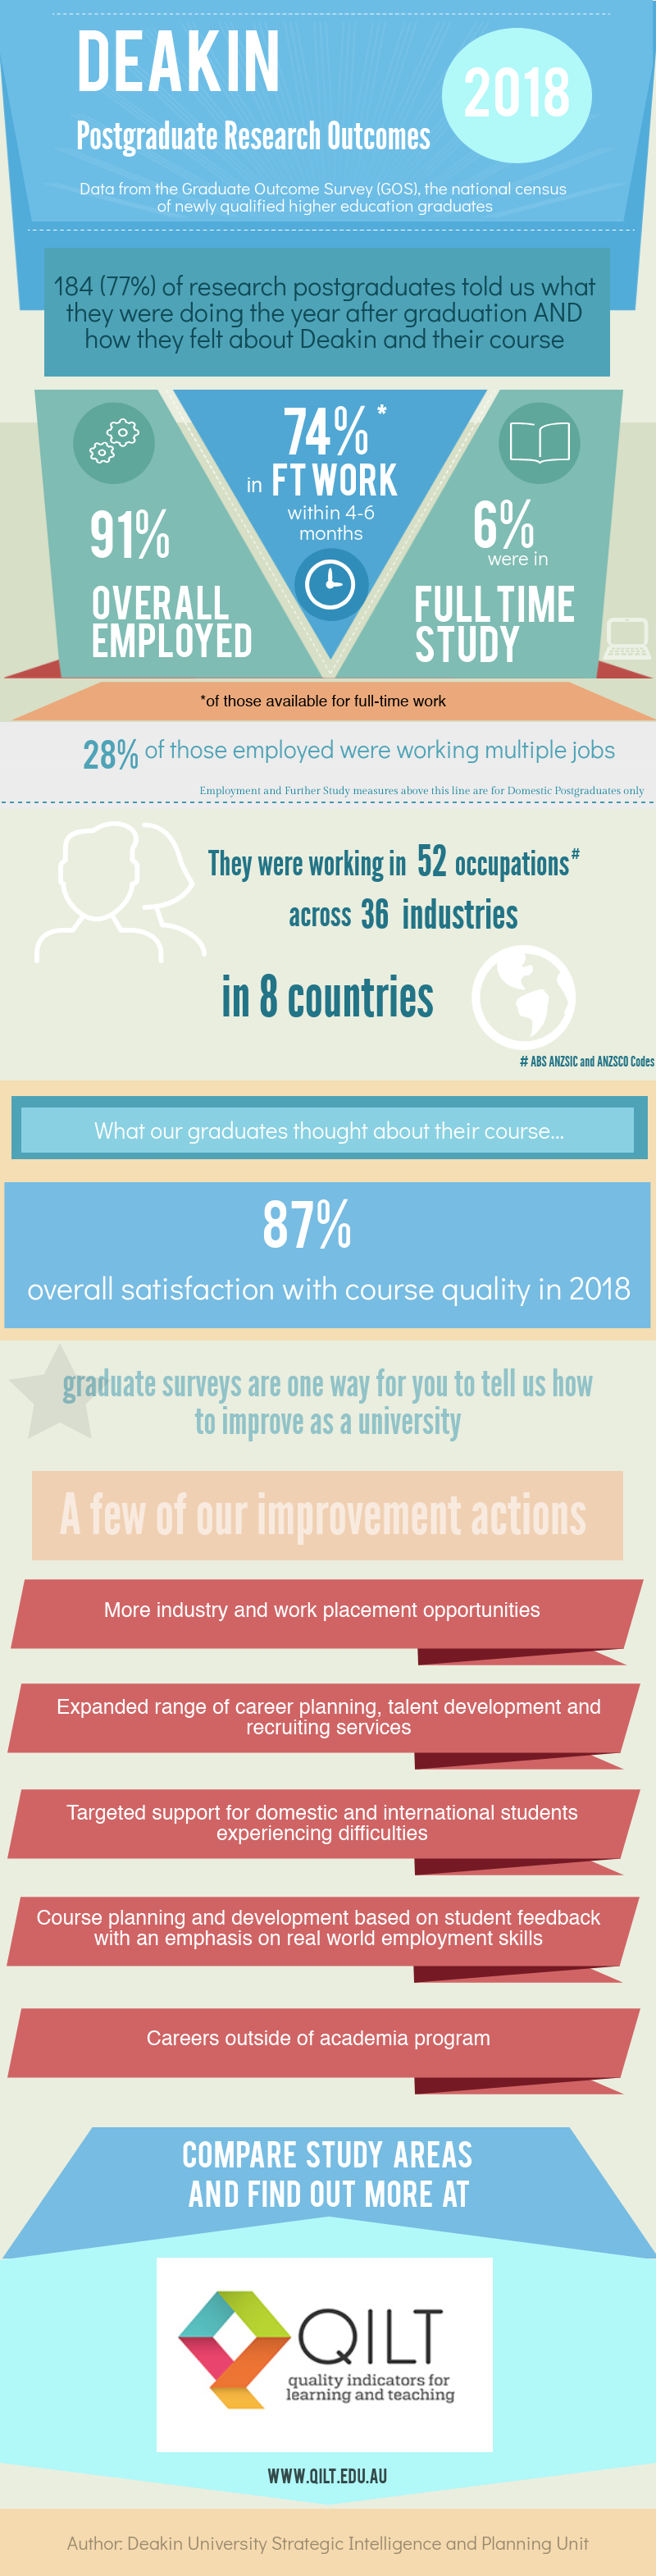 Infographic of the postgraduate research outcomes 2018, see second tab for text version